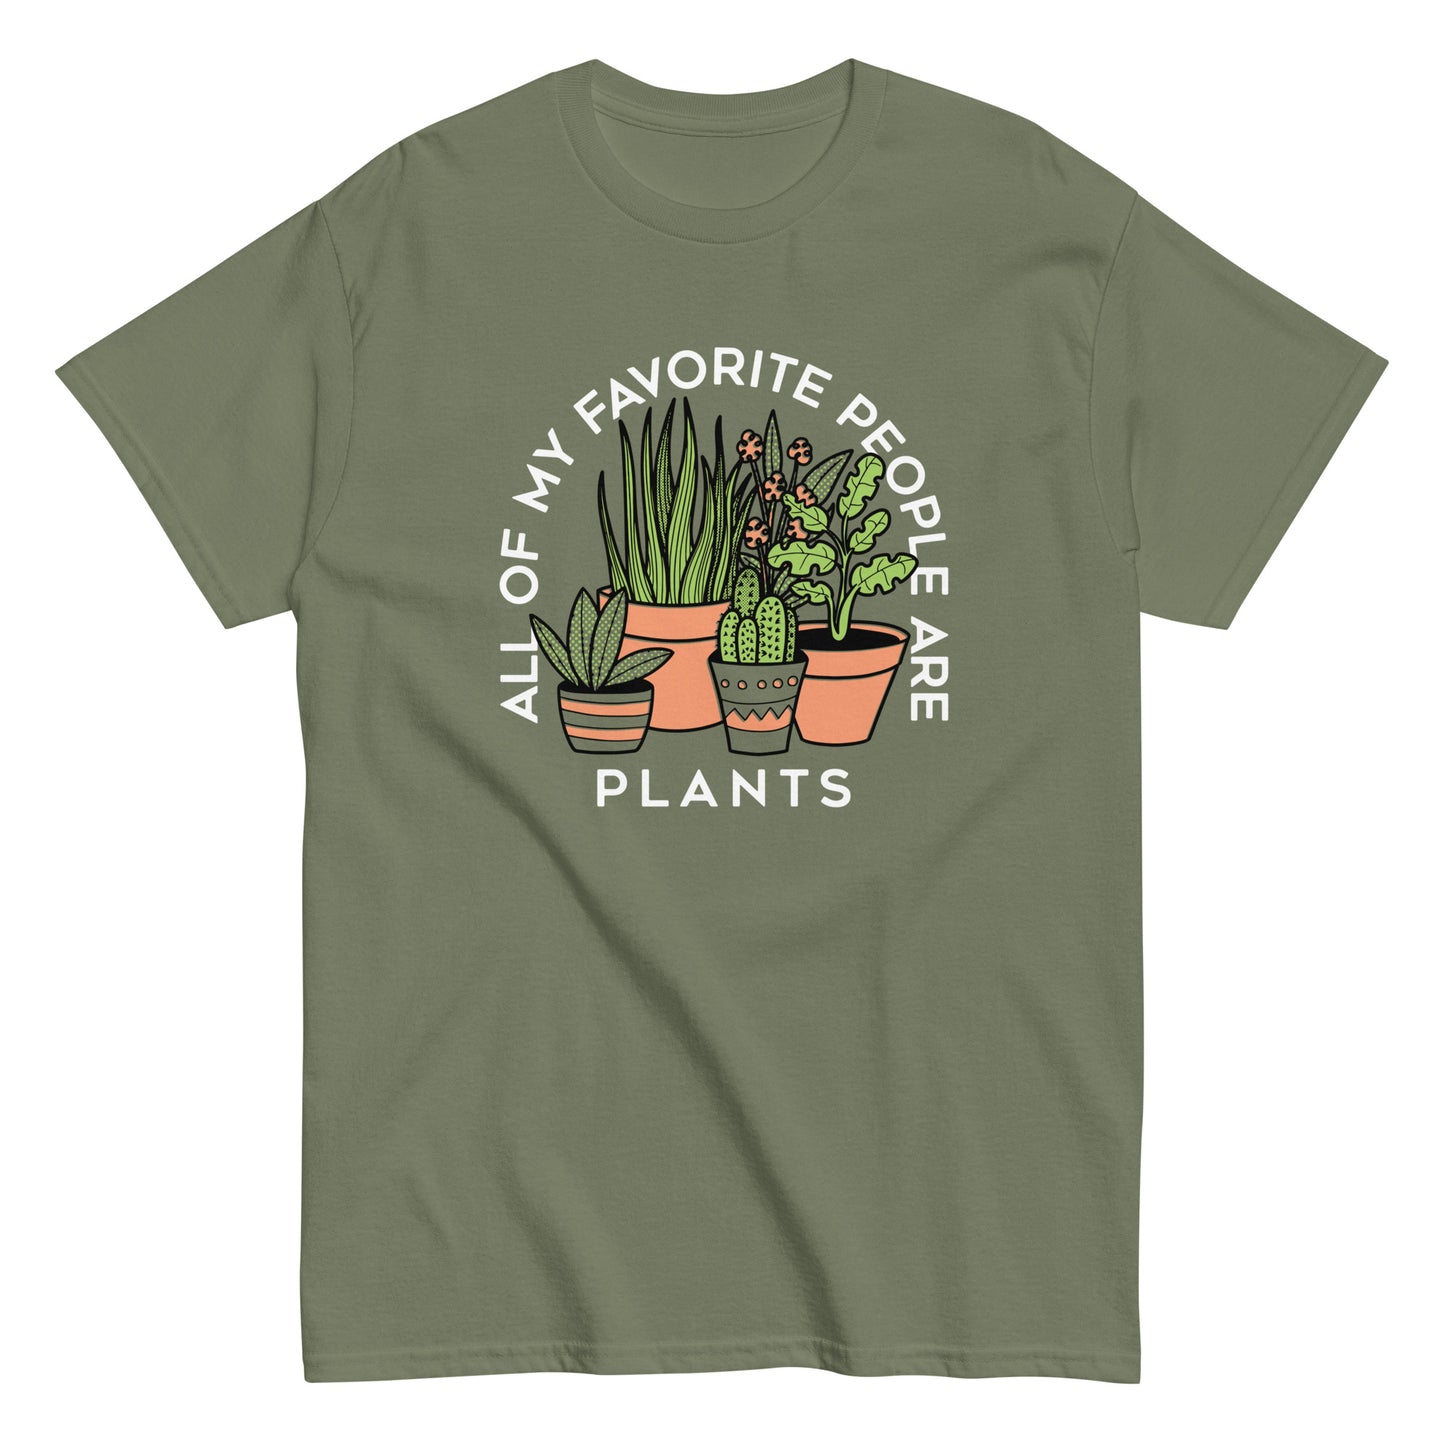 All Of My Favorite People Are Plants Men's Classic Tee